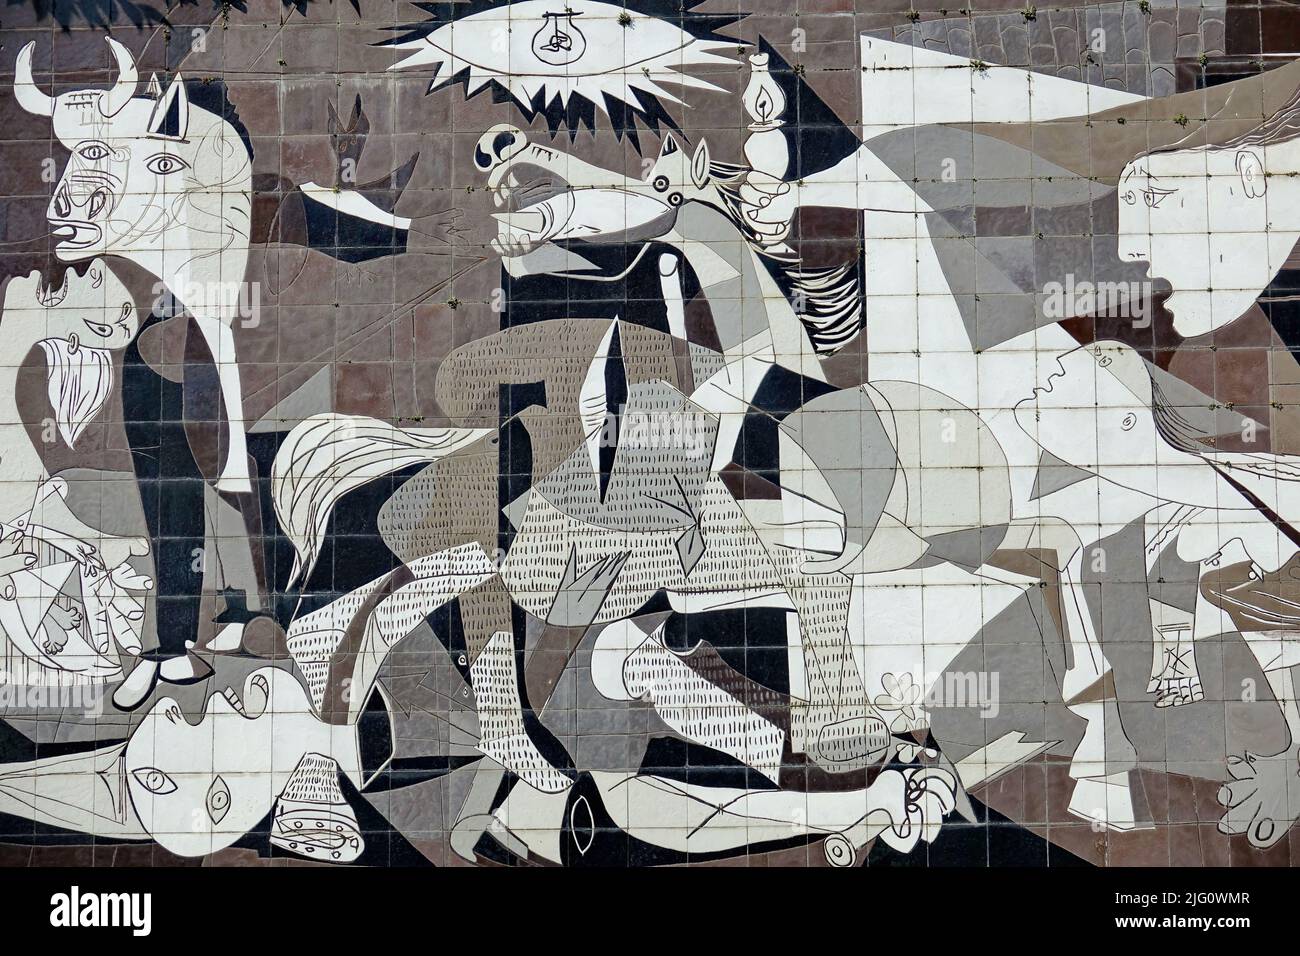 A tiled wall in Gernika reminds of the bombing during the Spanish Civil War. Guernica, Spain - August 2018 Stock Photo